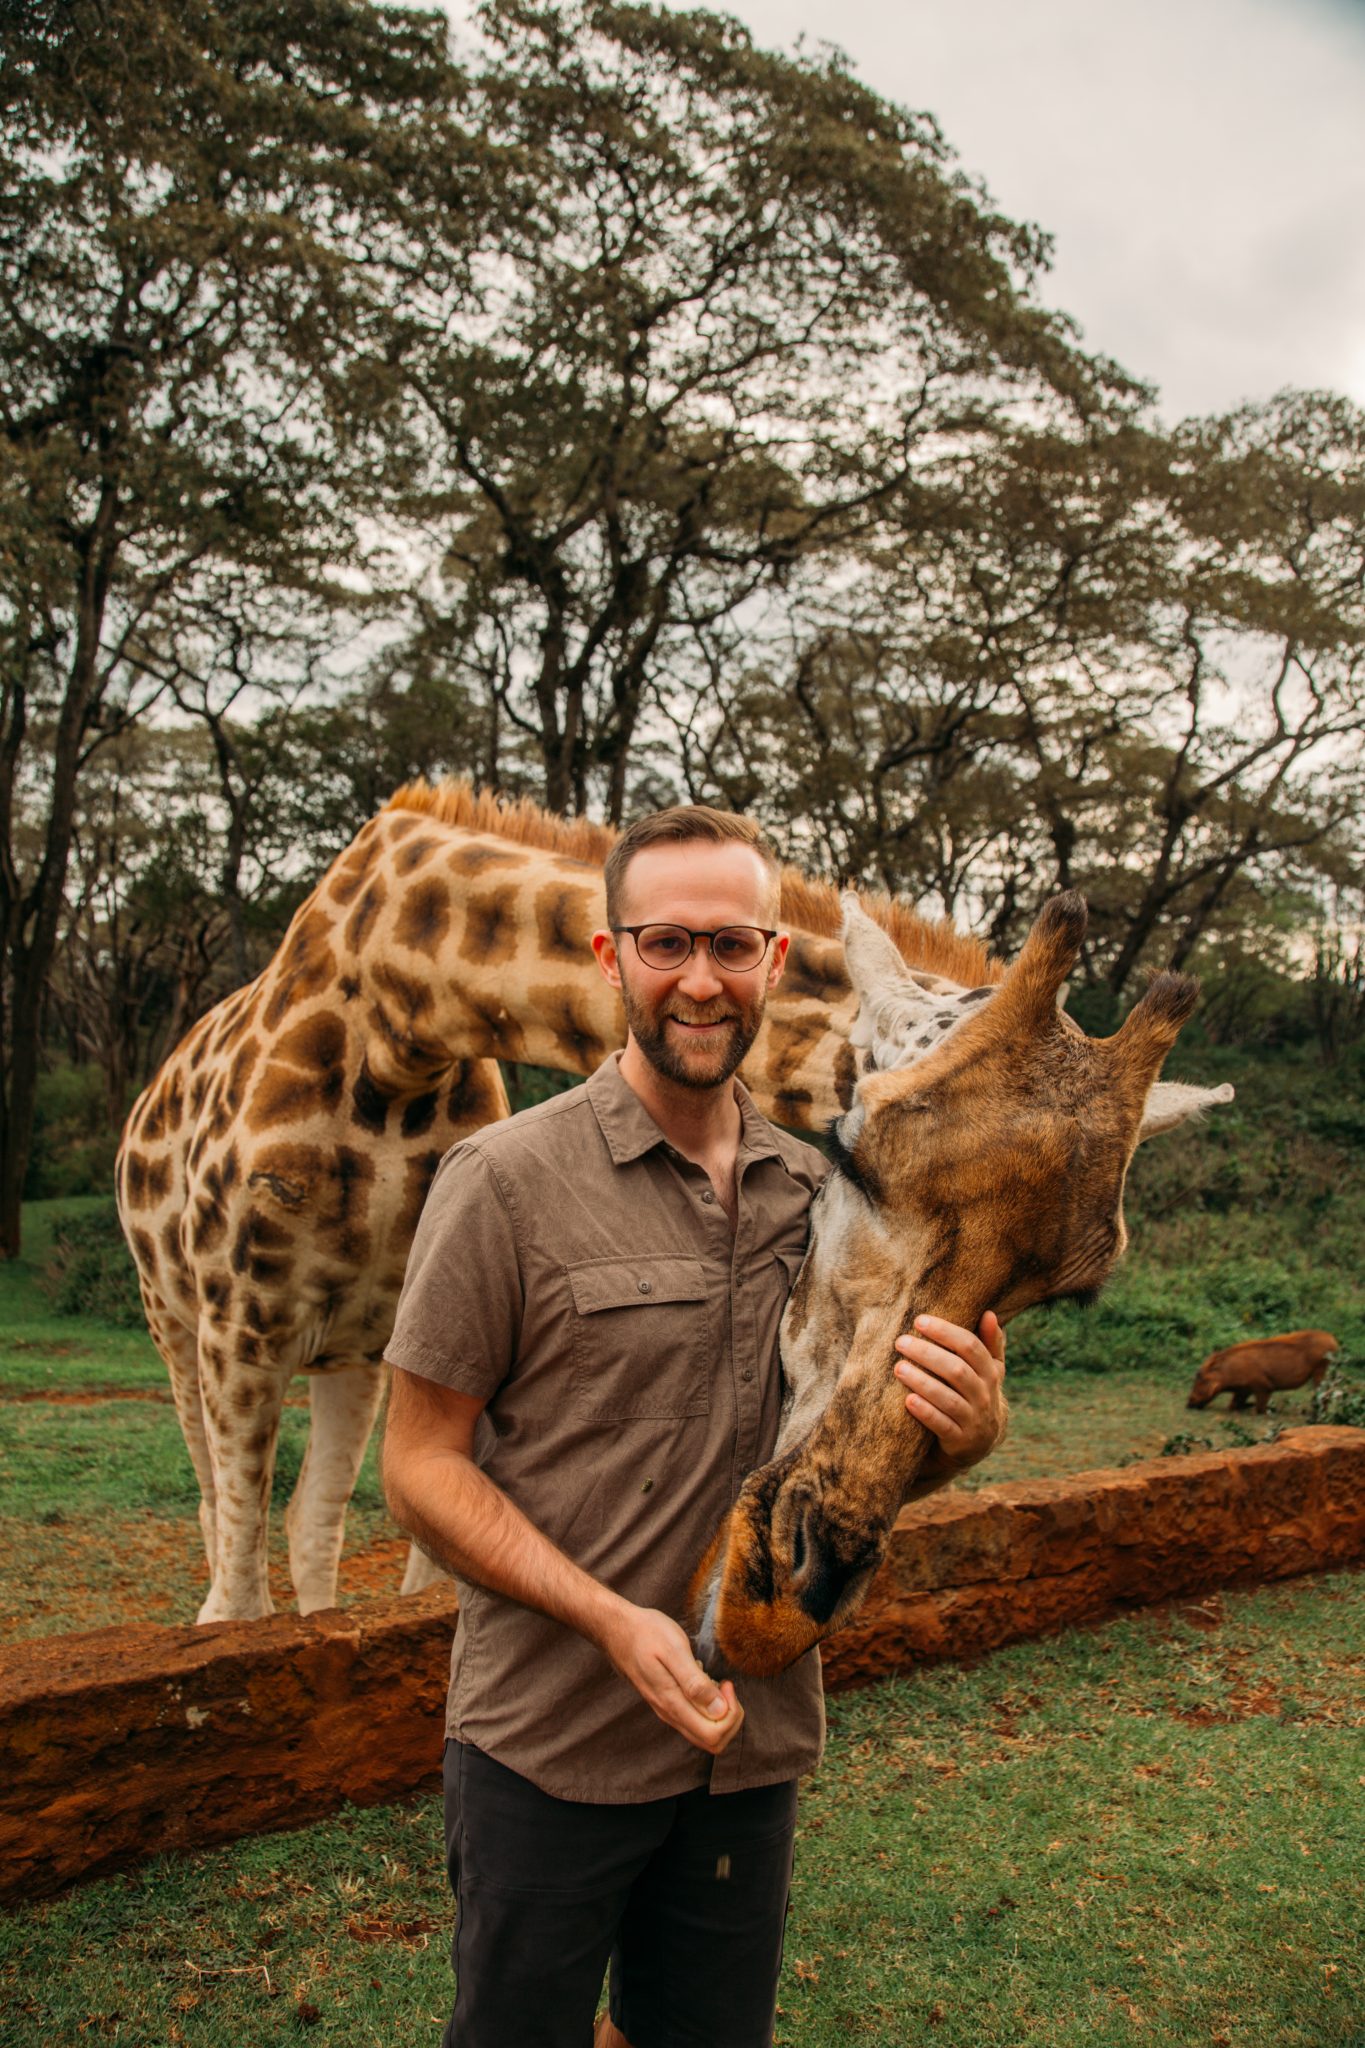 A man is petting a giraffe and smiling at the camera.